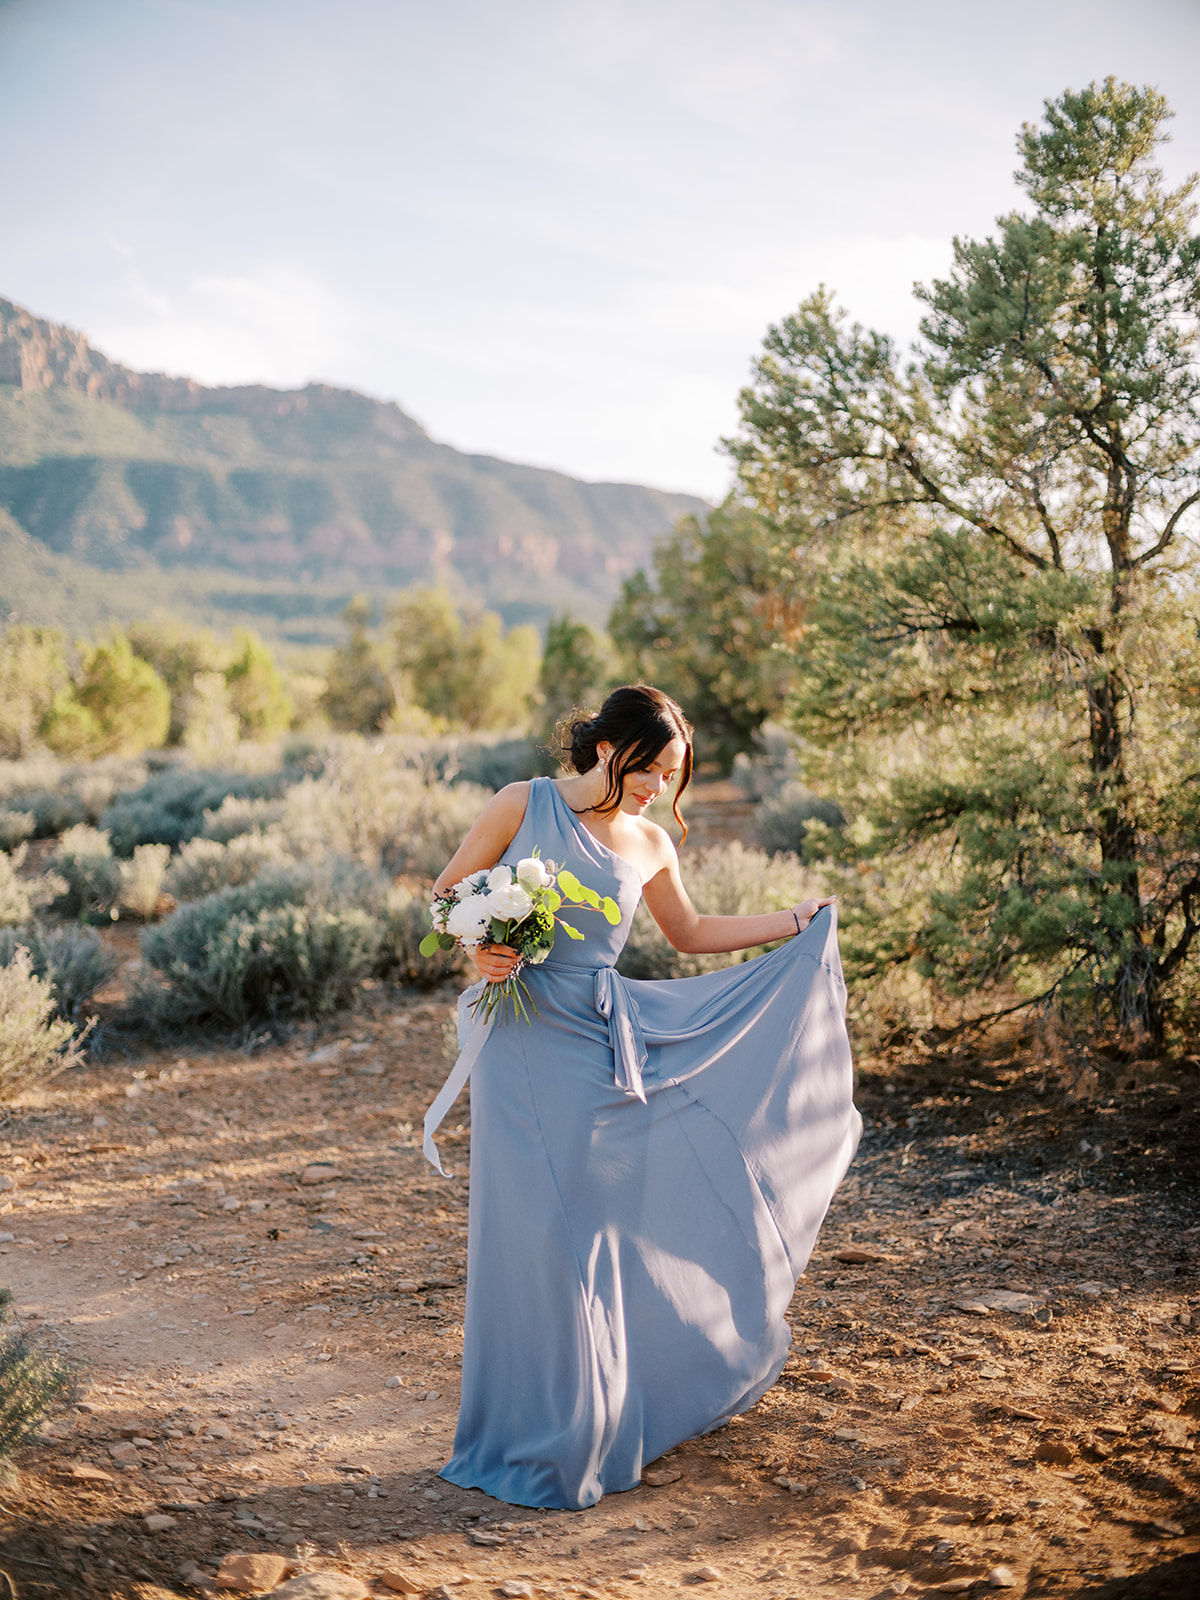 Bridesmaid in her dress after the wedding ceremony in Zion National Park